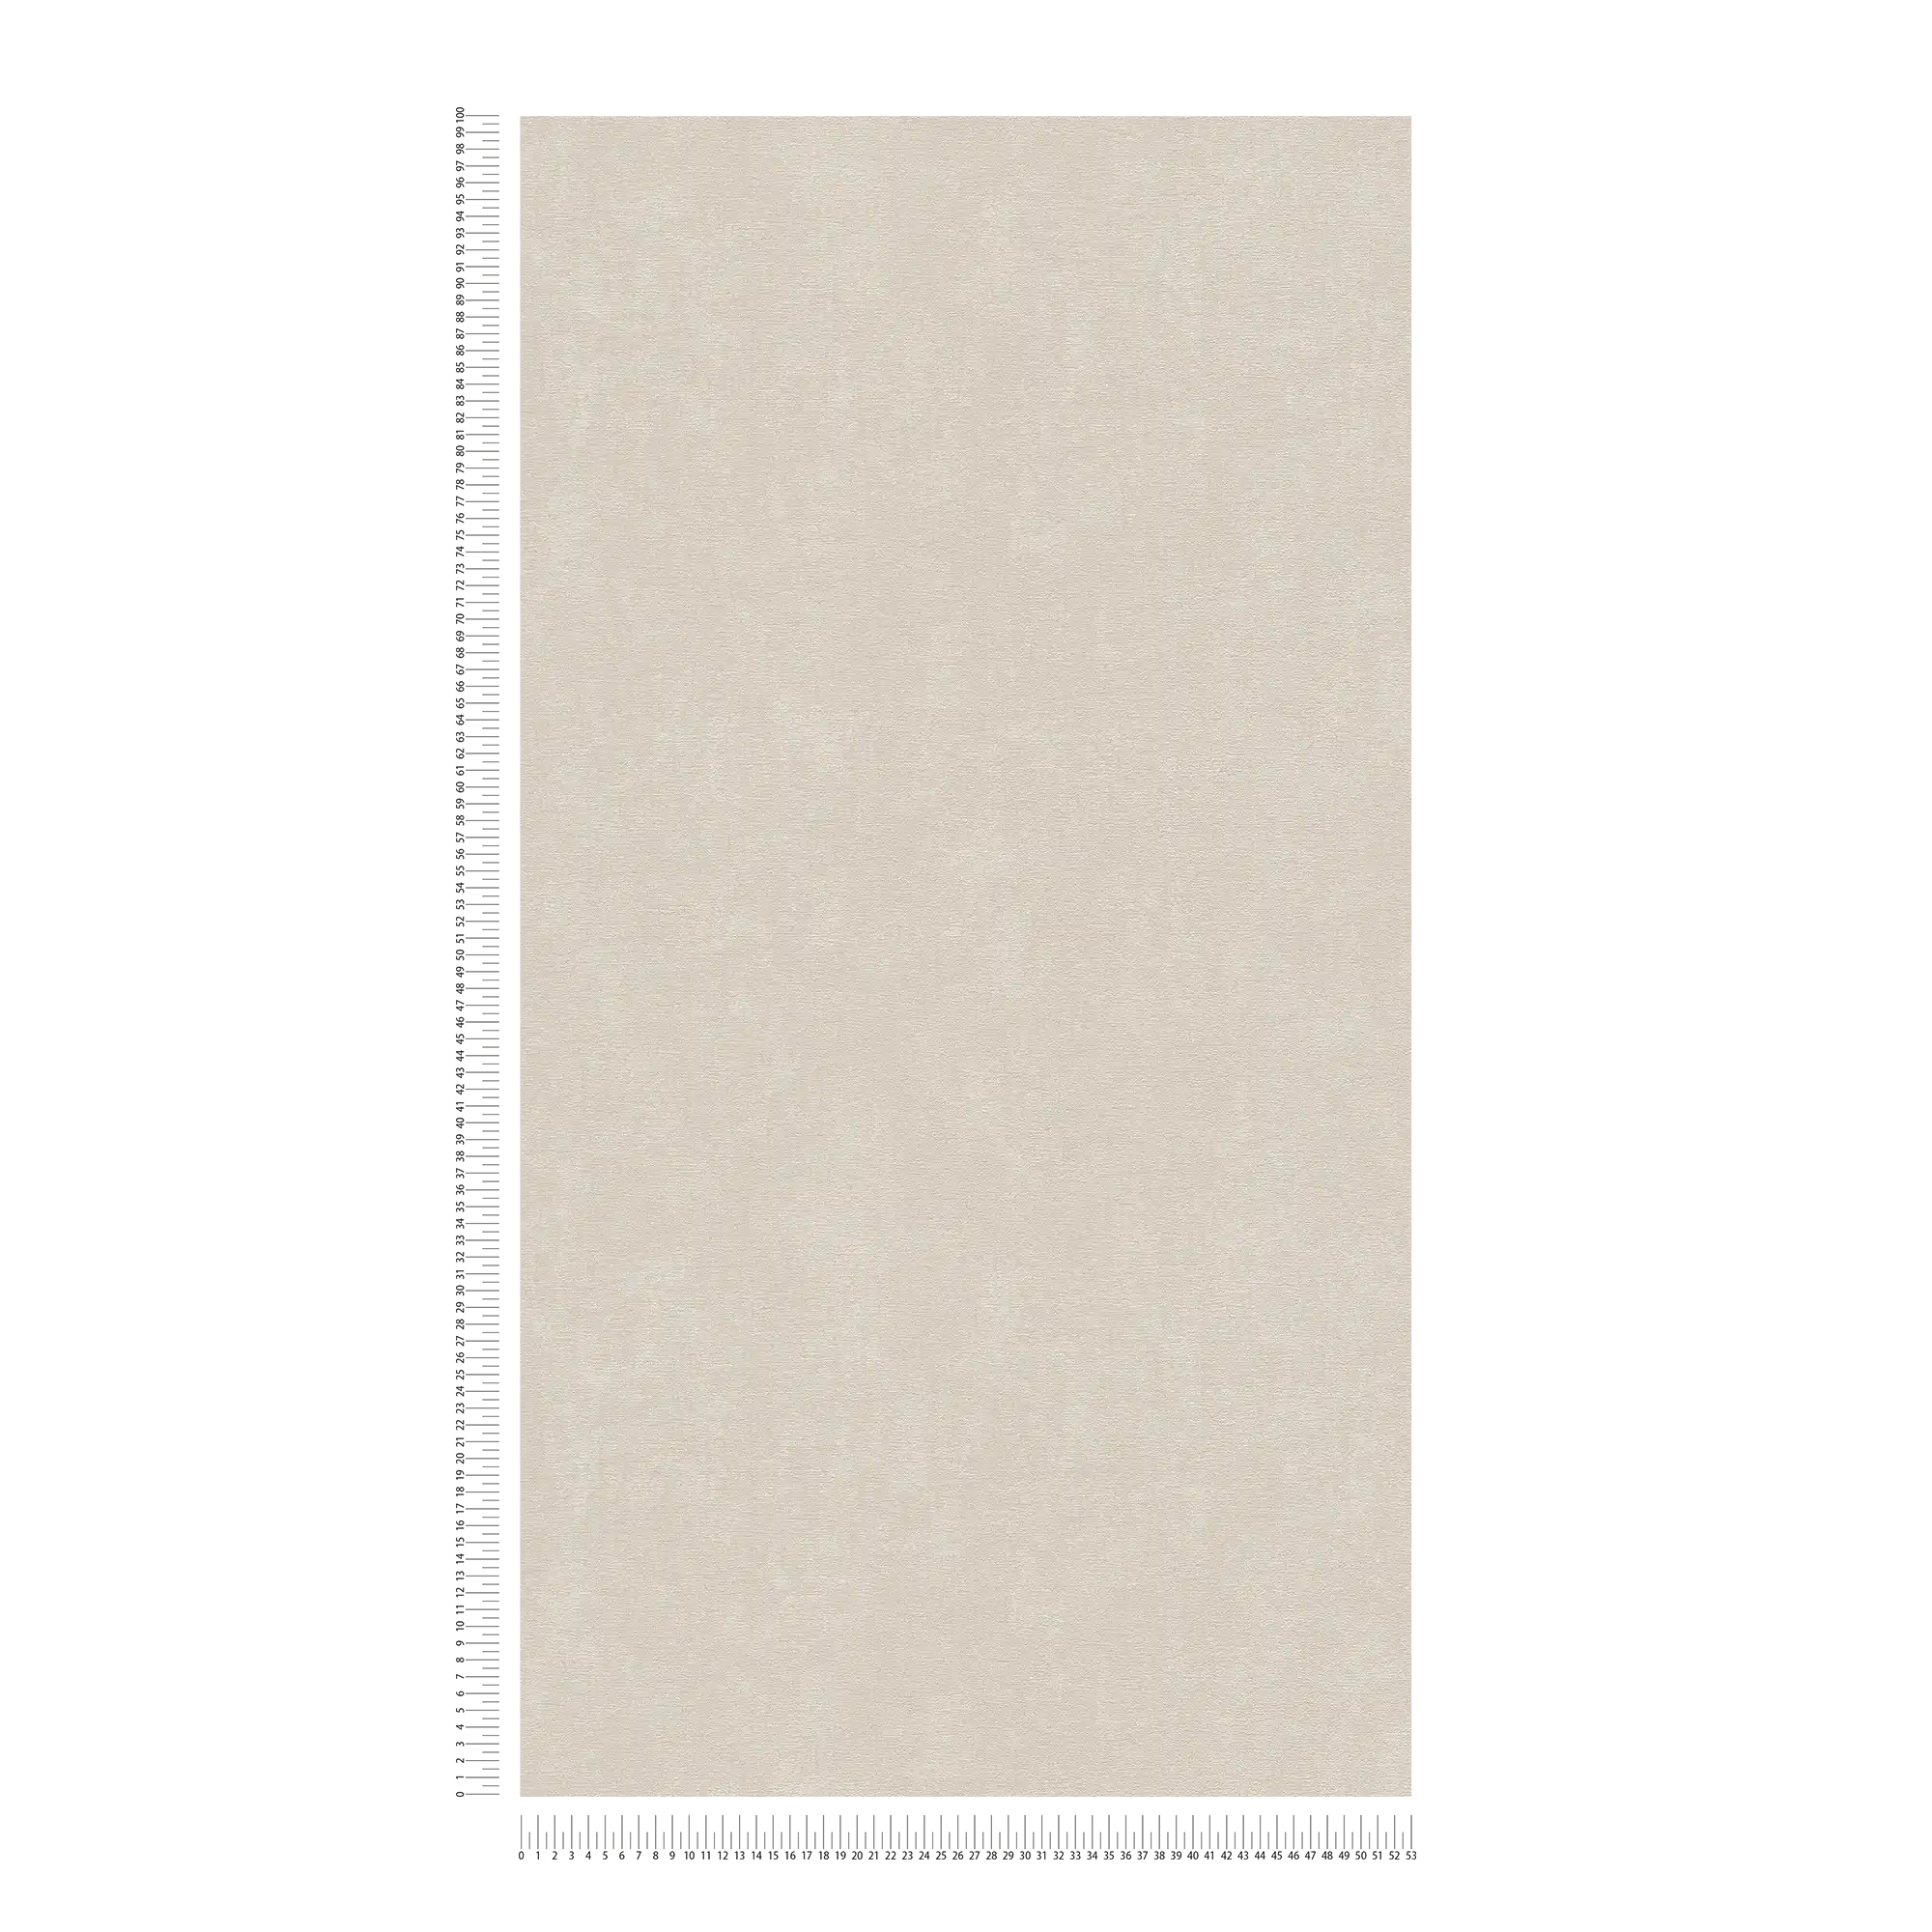             Lightly textured non-woven wallpaper, single-coloured - beige
        